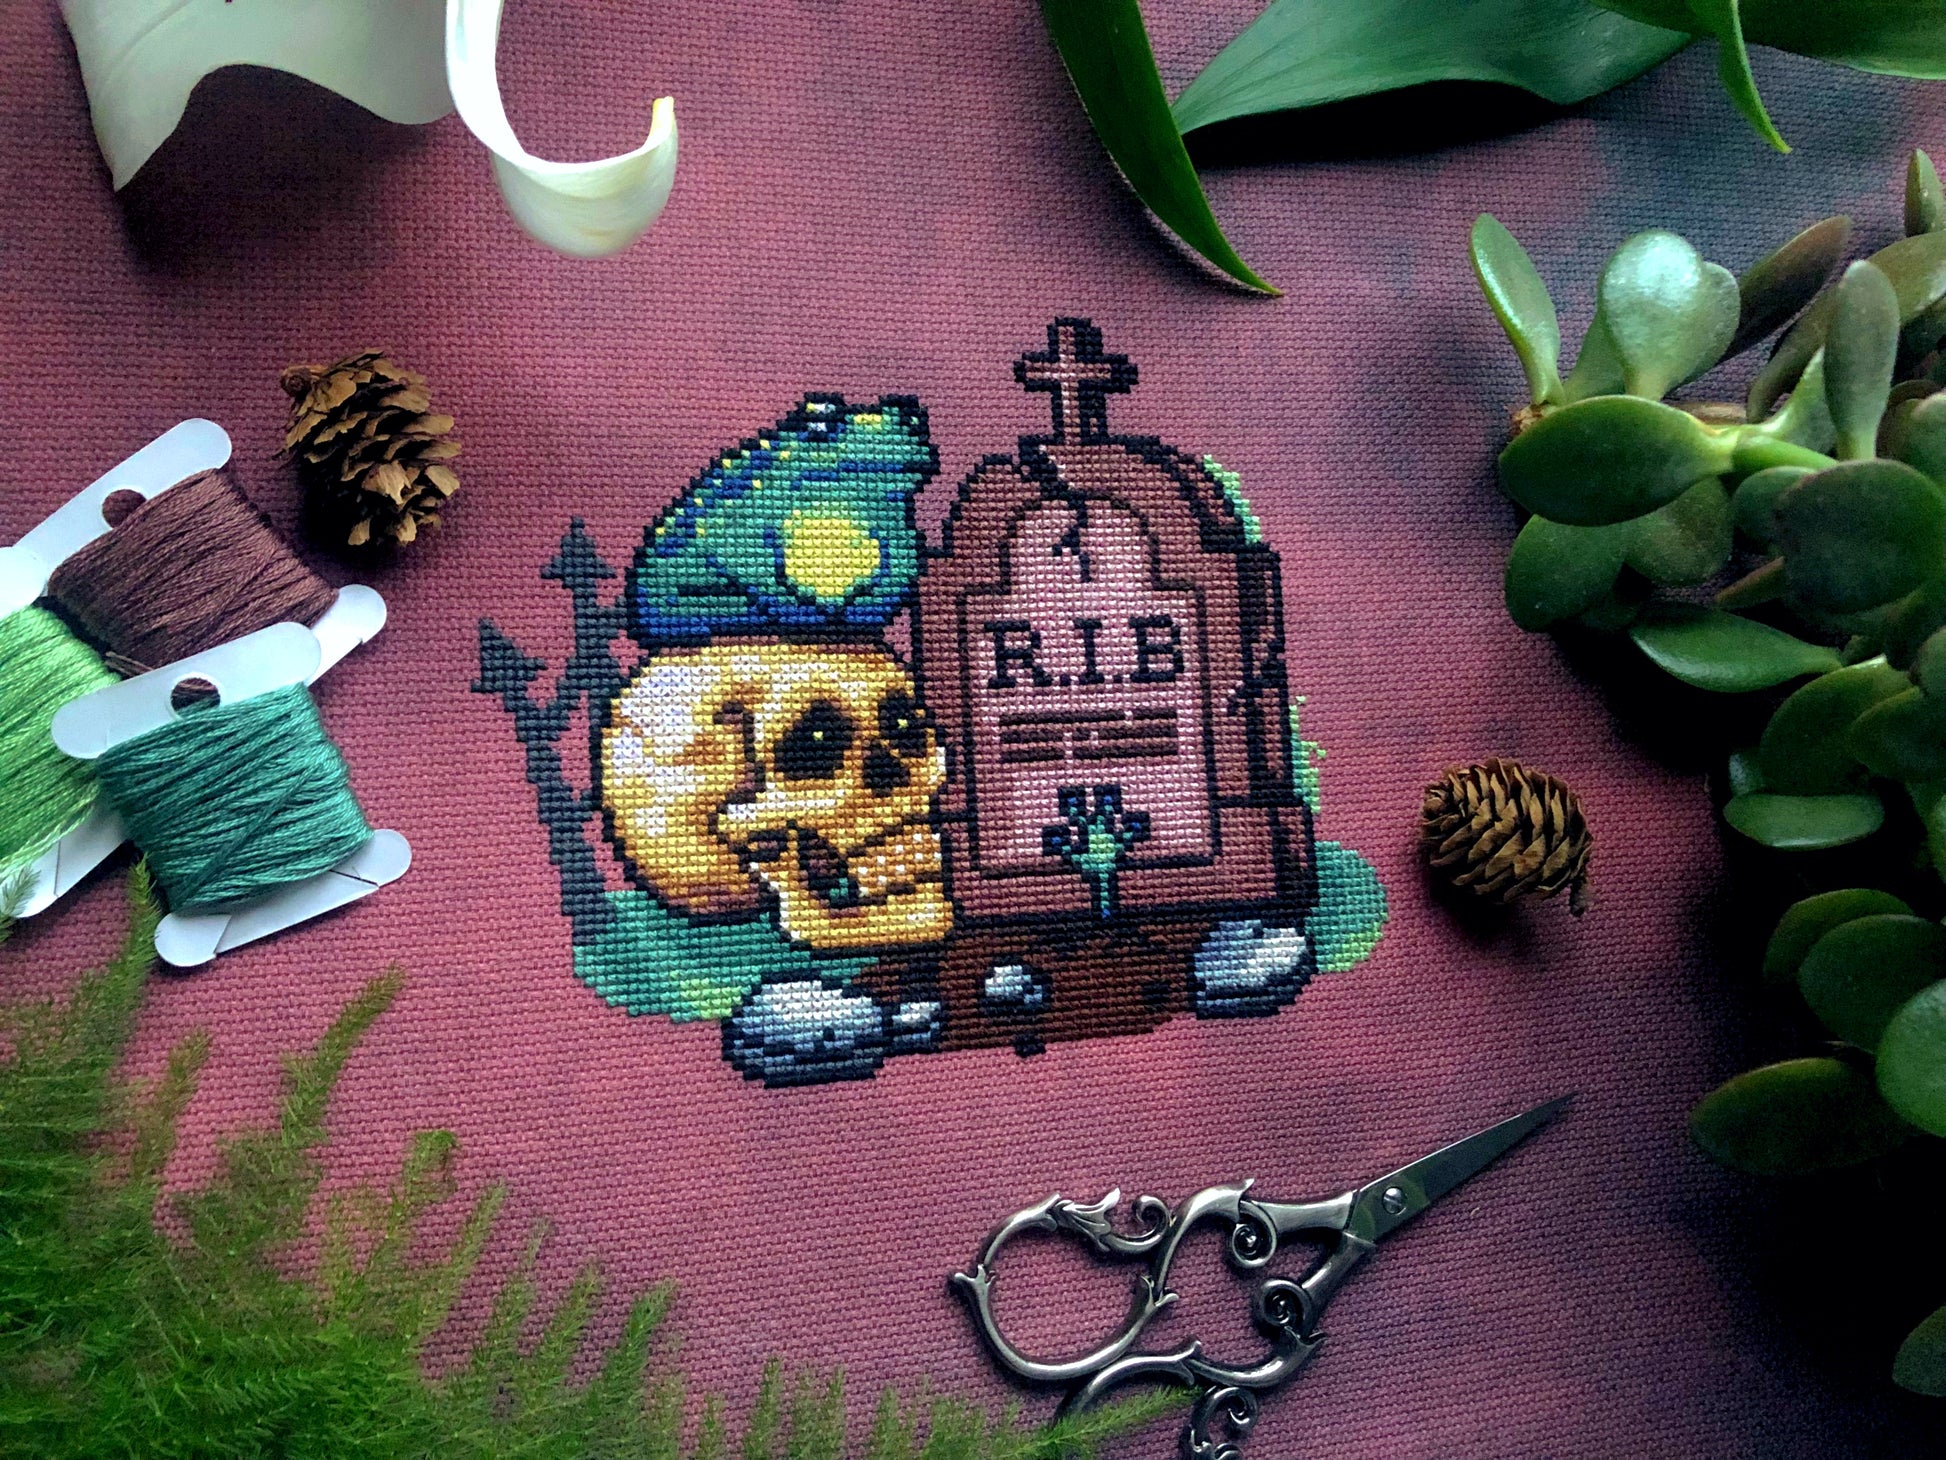 Front view of frog graveyard Rest in Bog cross stitch pattern. Frog is sitting on a realistic looking skull, next to a tombstone that says R.I.B. Fabric is a brown/purple shade. Scene is surrounded by foliage, scissors, pinecones and bobbins.